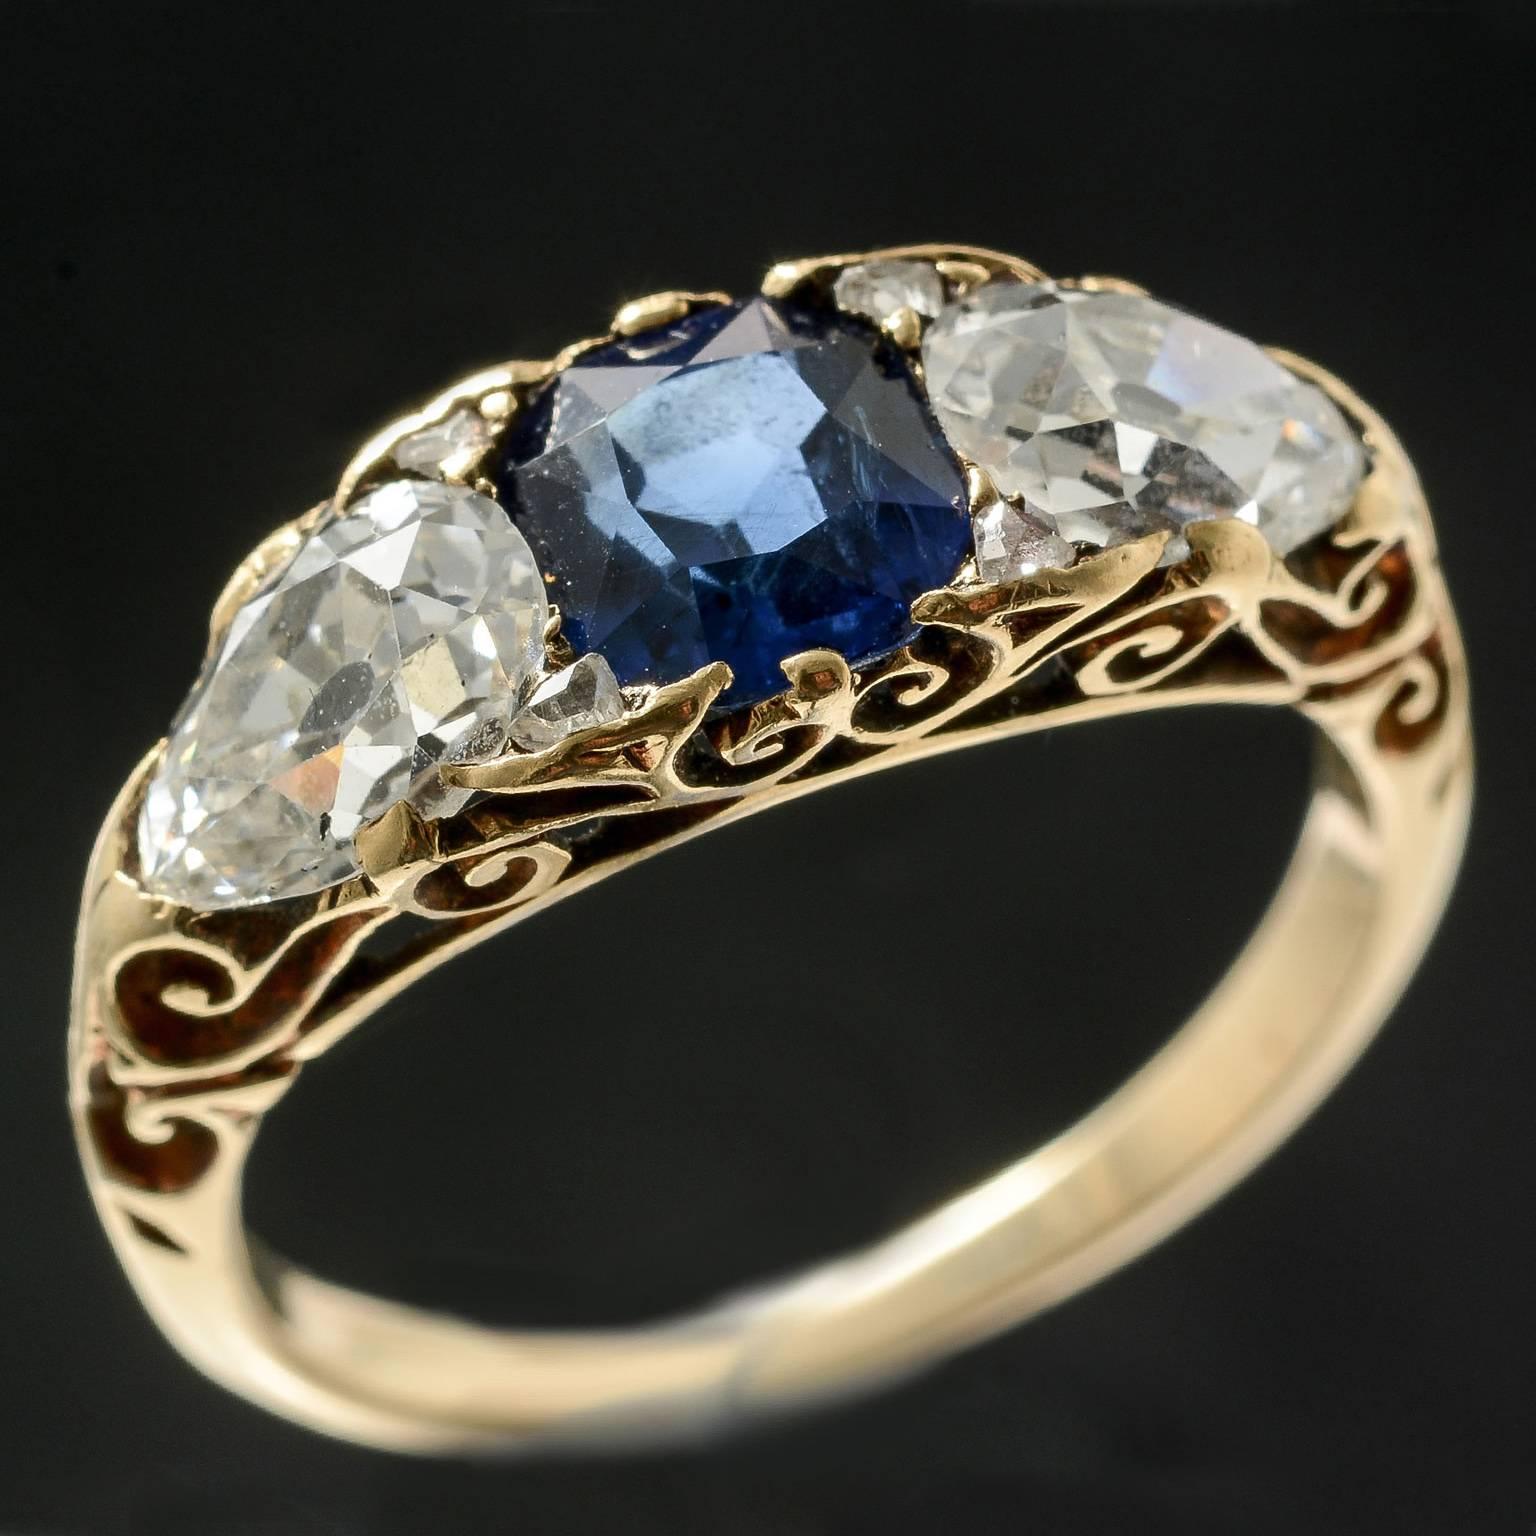 Women's Victorian Carved Half Hoop Burmese Sapphire and Diamond Ring, circa 1880 For Sale